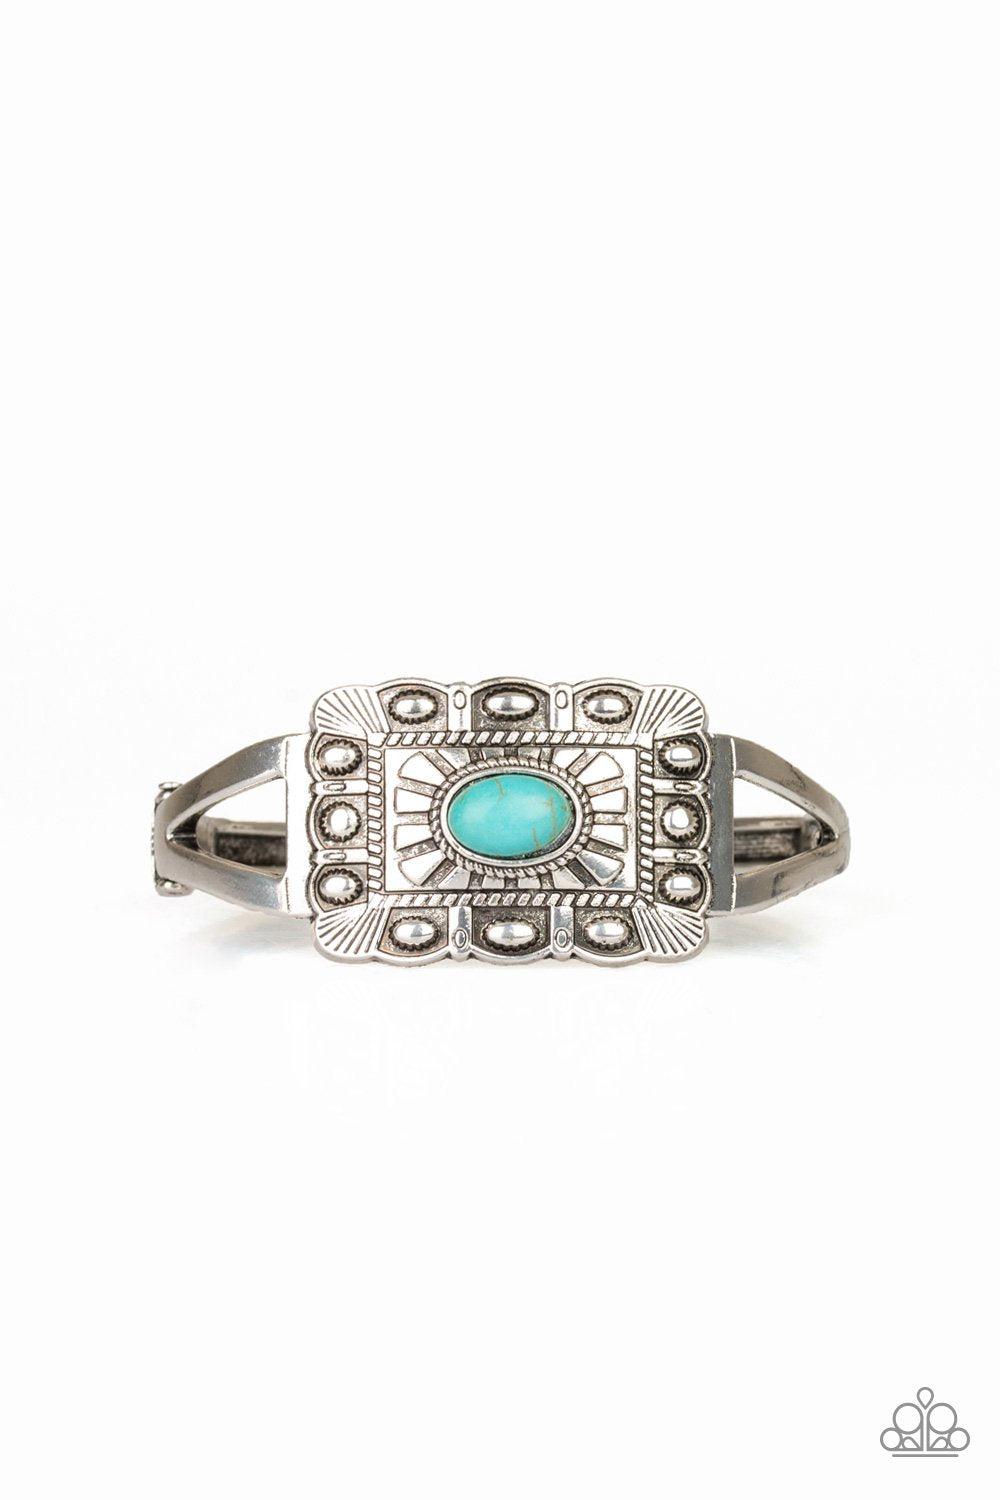 BIG House On The Prairie Silver and Turquoise Blue Stone Hinged Bracelet - Paparazzi Accessories-CarasShop.com - $5 Jewelry by Cara Jewels